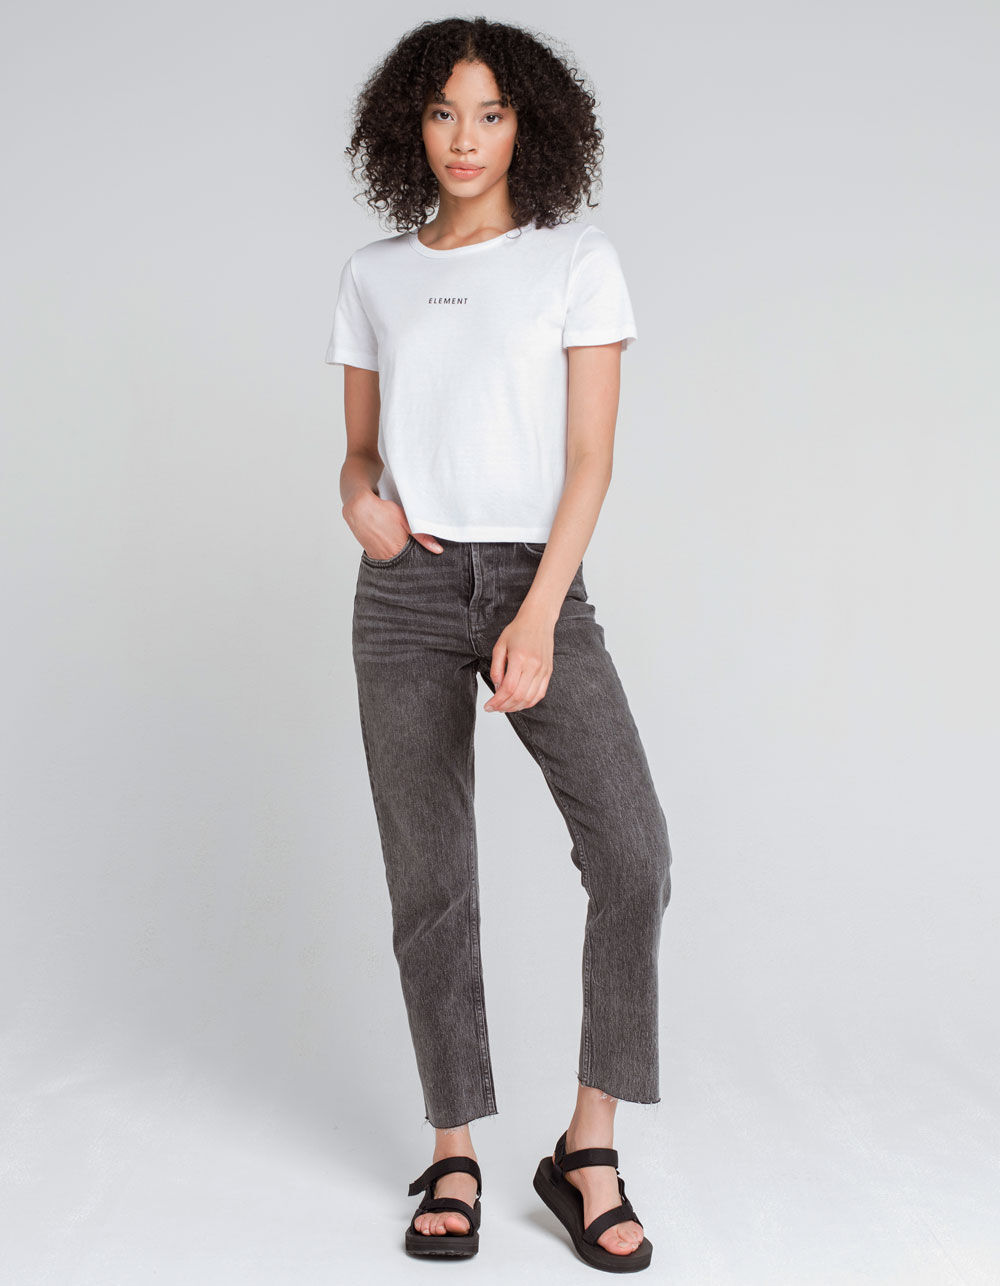 ELEMENT Beehive Womens Tee - WHITE | Tillys